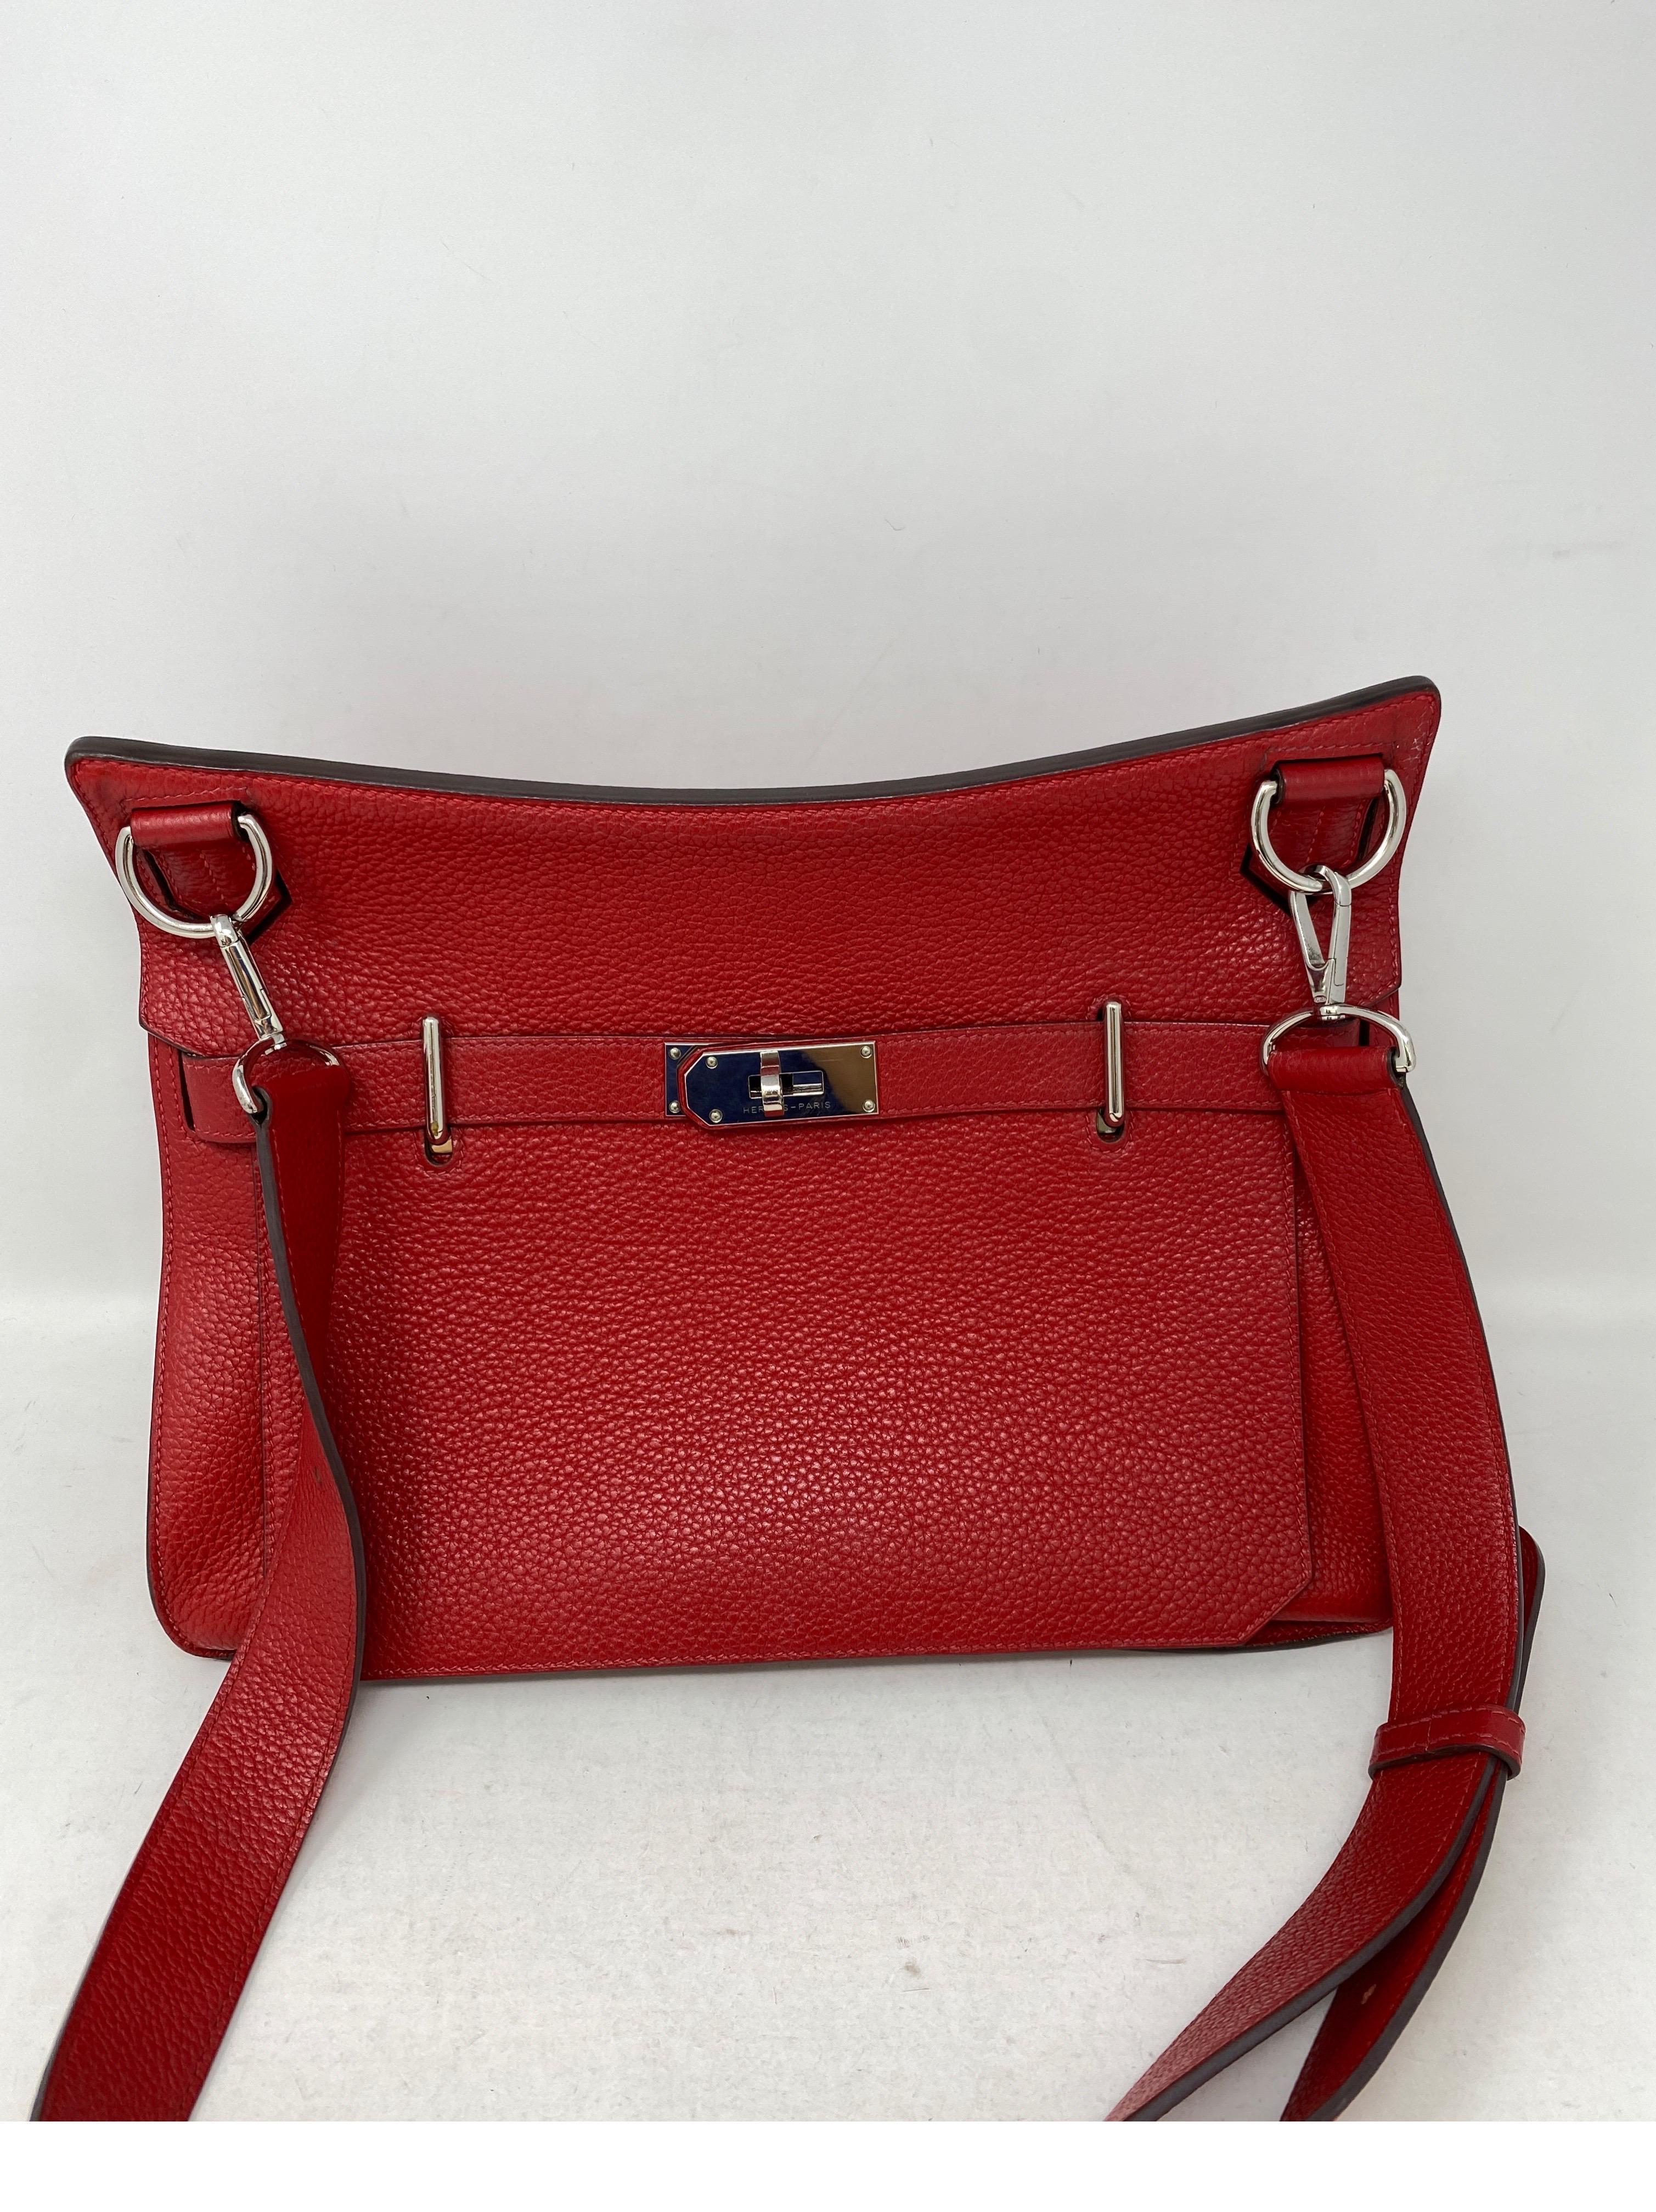 Hermes Red Jypsiere 34 Bag. Togo leather. Palladium hardware. Good condition. Larger crossbody bag. Can be shorter too. Interior very clean. Guaranteed authentic. 